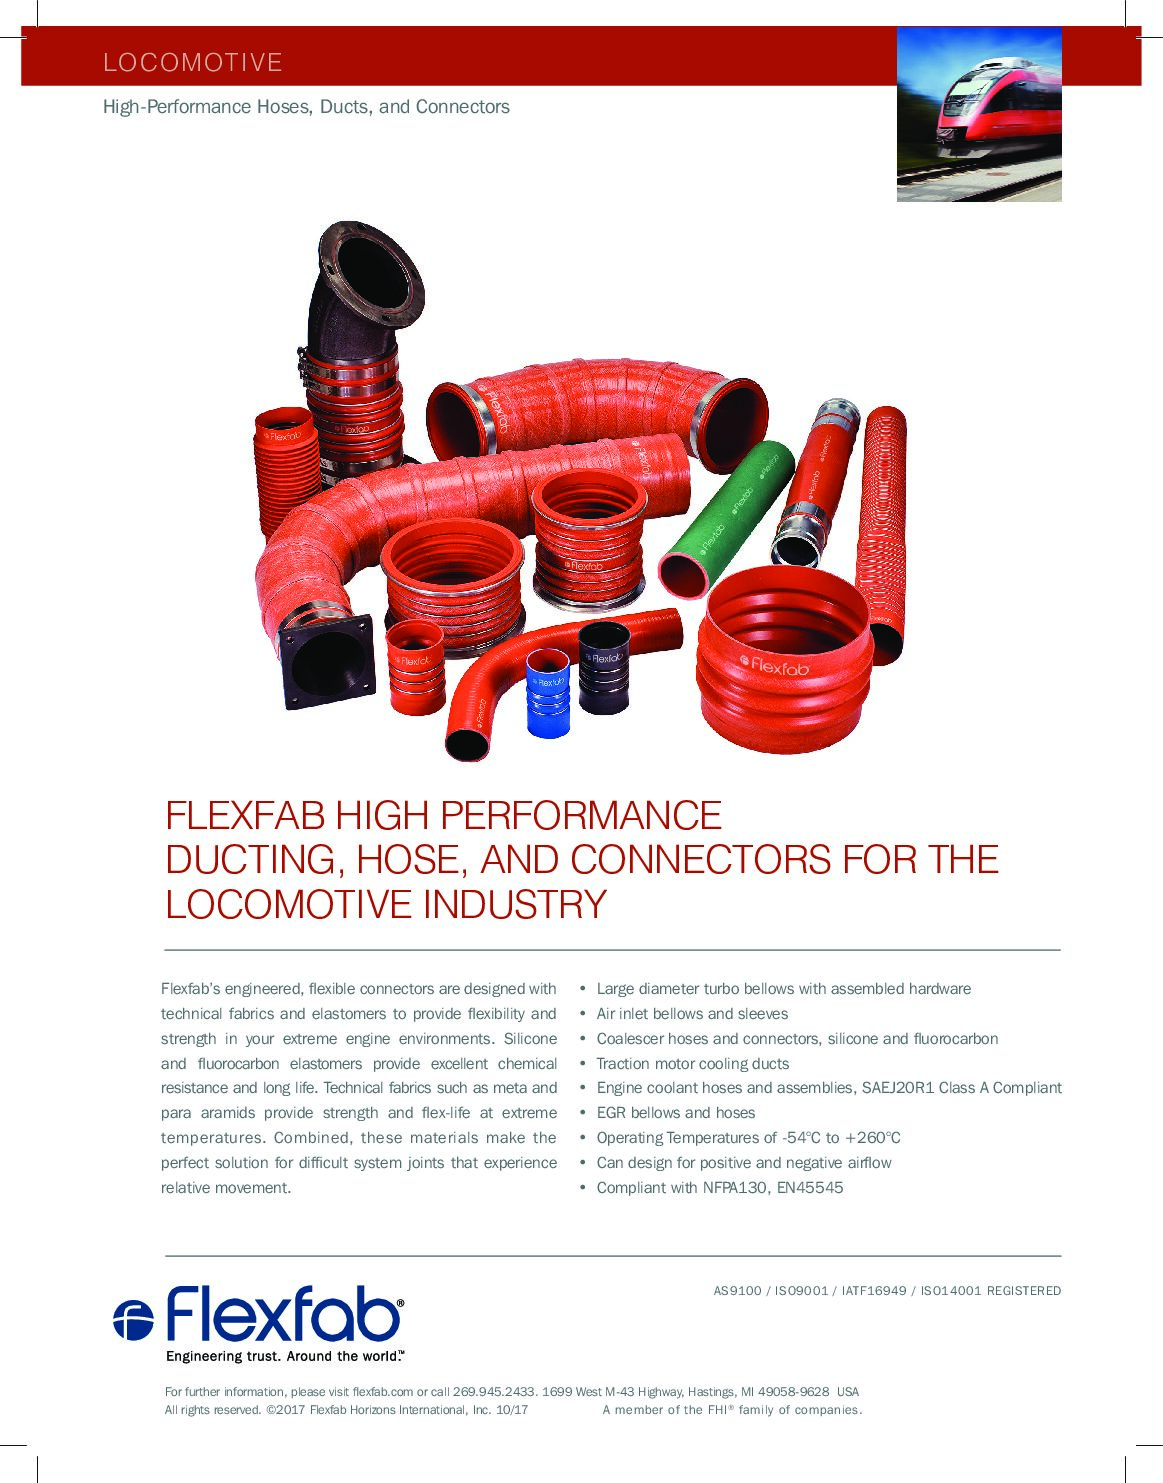 High Performance Ducting, Hose, and Connectors for the Locomotive Industry